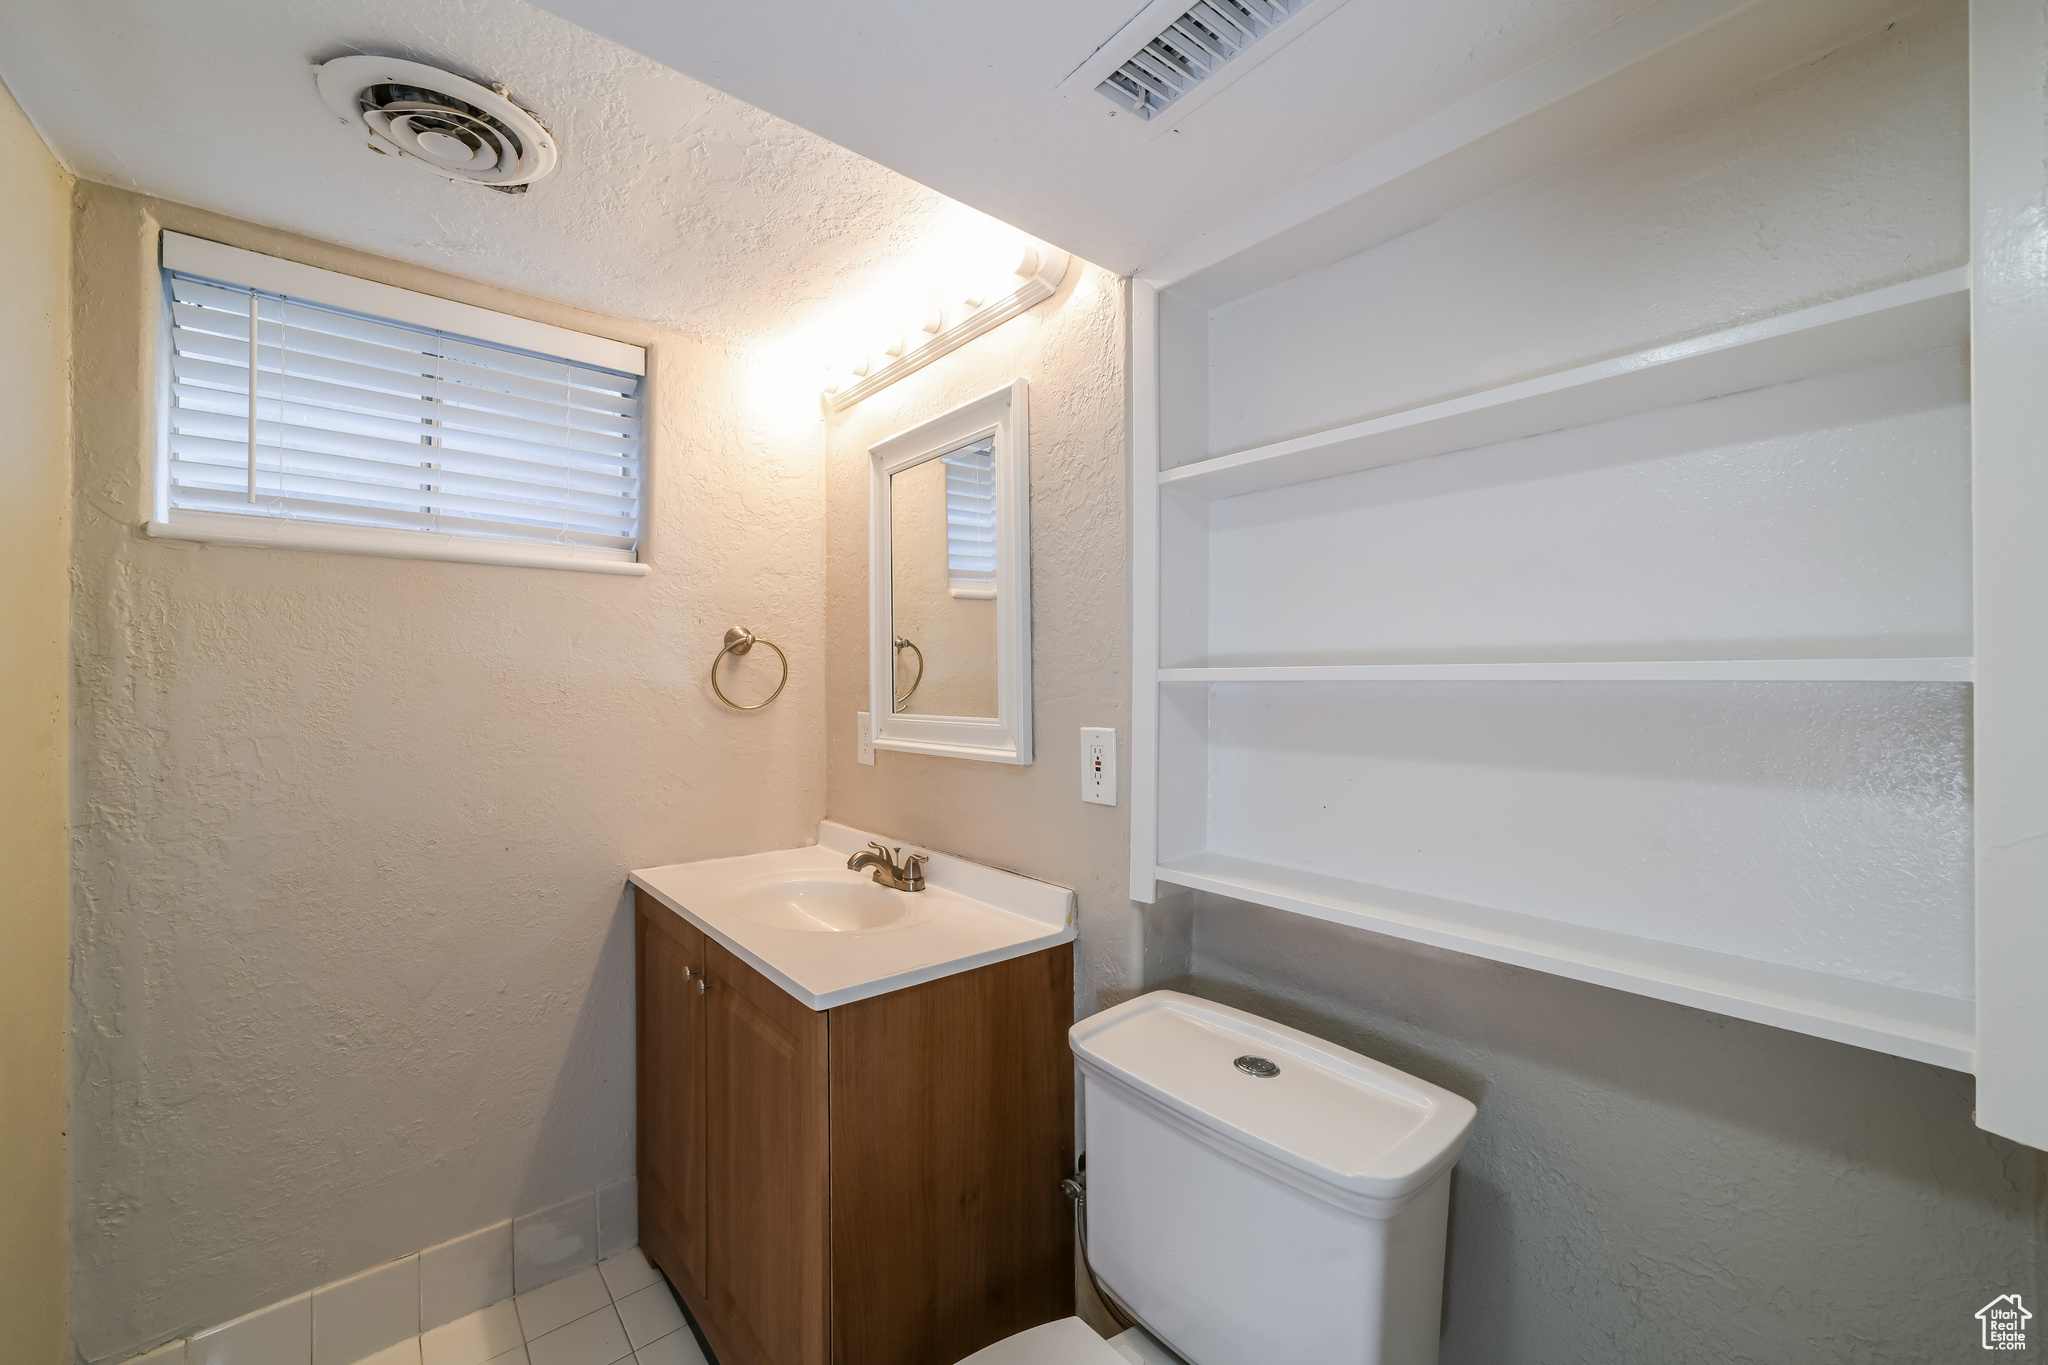 Bathroom featuring a textured ceiling, oversized vanity, toilet, and tile flooring